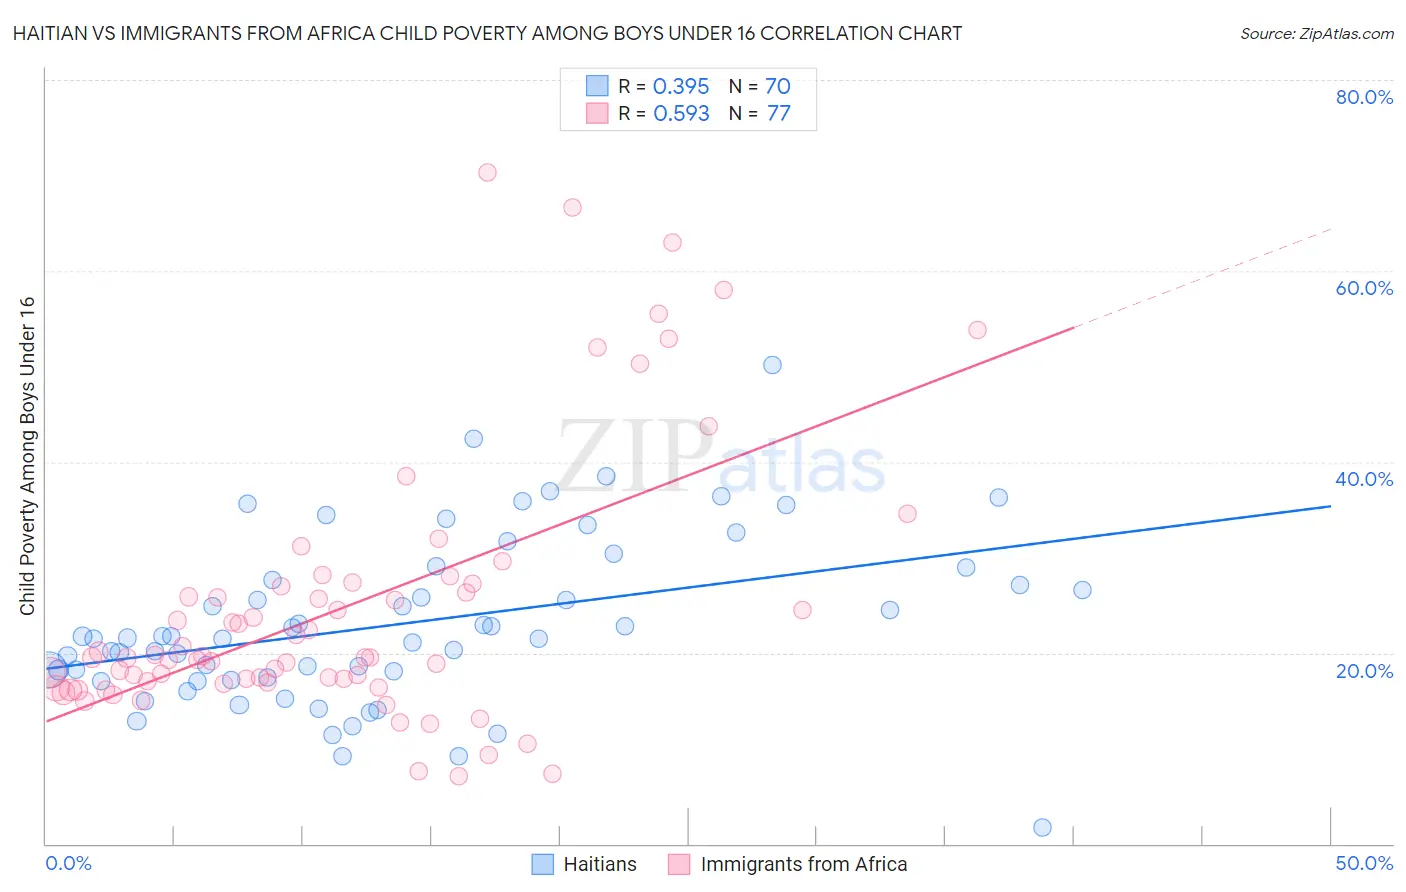 Haitian vs Immigrants from Africa Child Poverty Among Boys Under 16